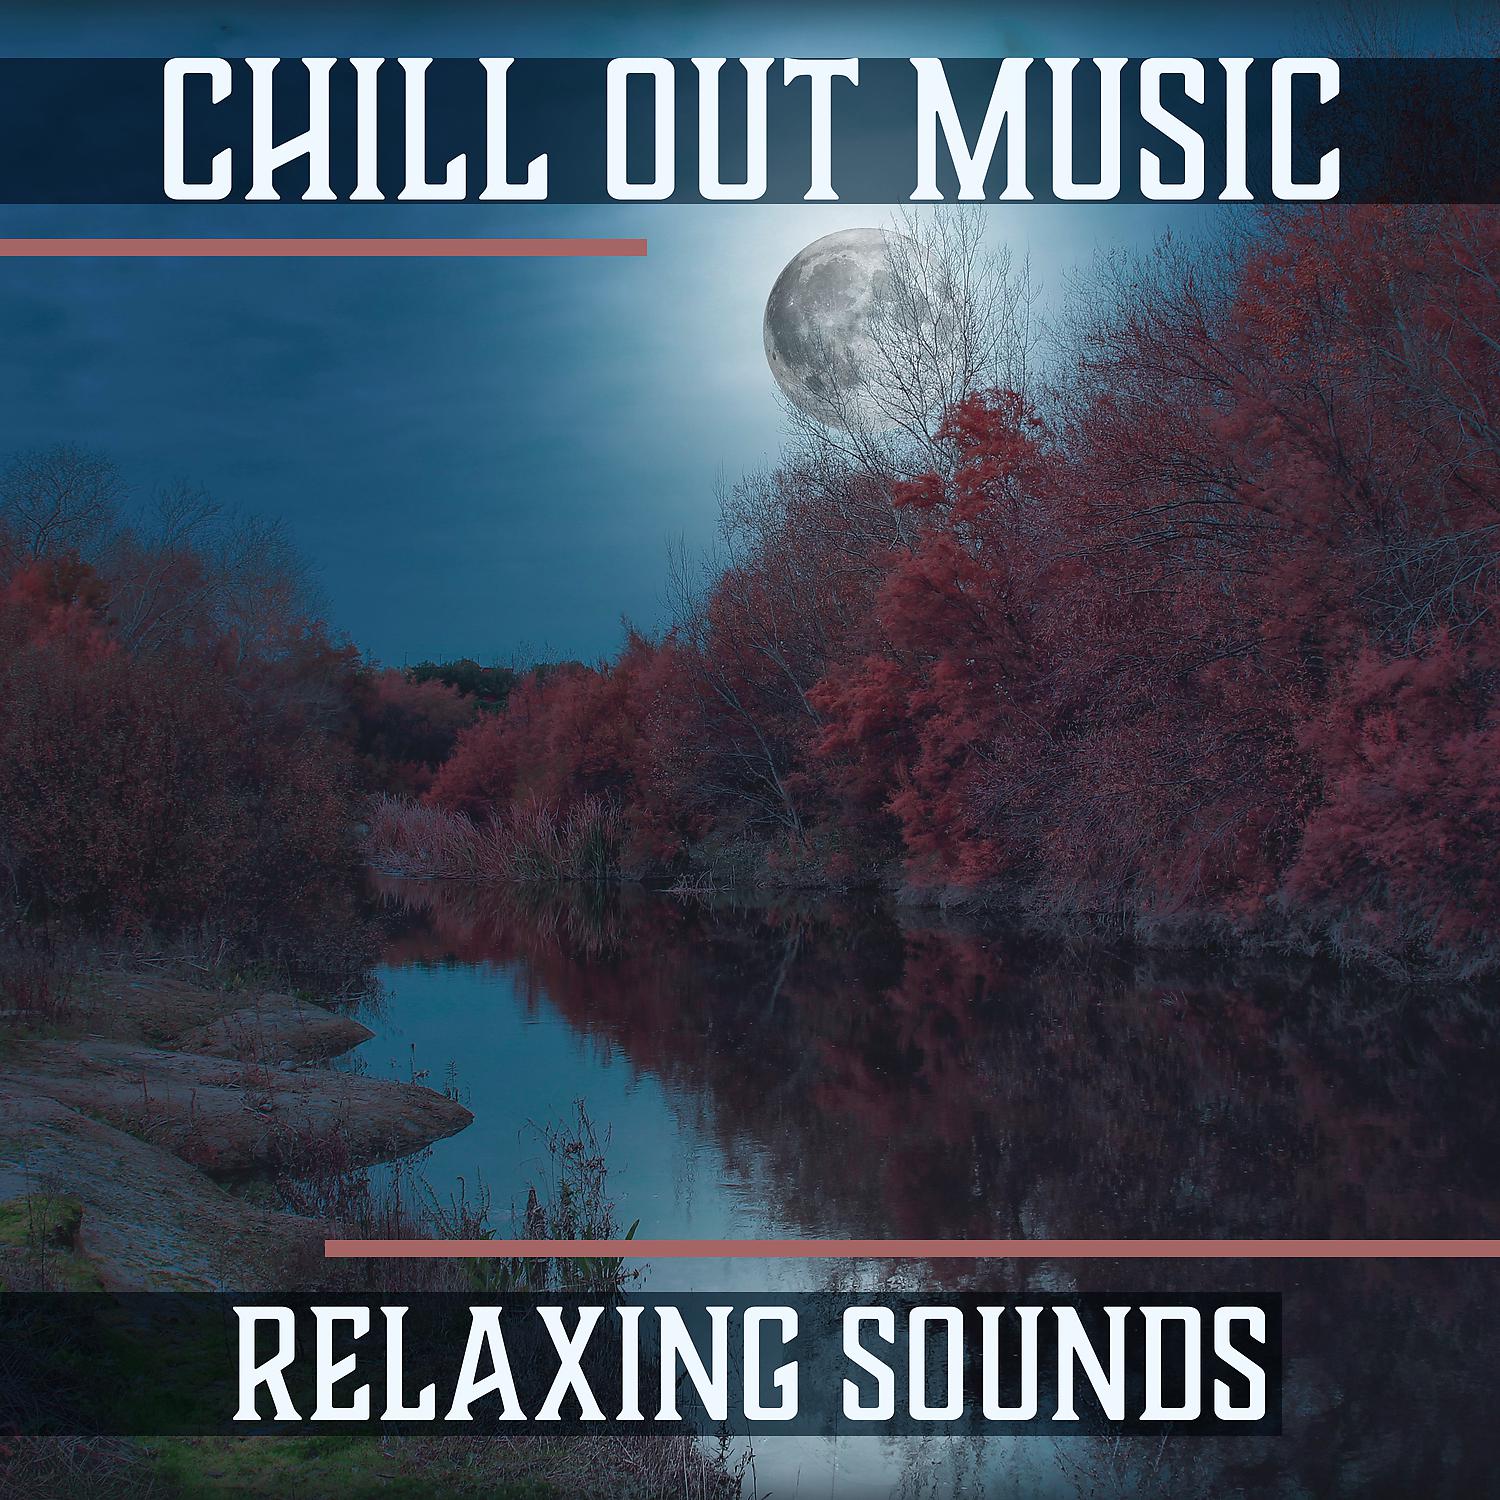 Постер альбома Chill Out Music – Relaxing Sounds, Tranquil Dreams, Slow Emotions, Peaceful Mood, Restful Time